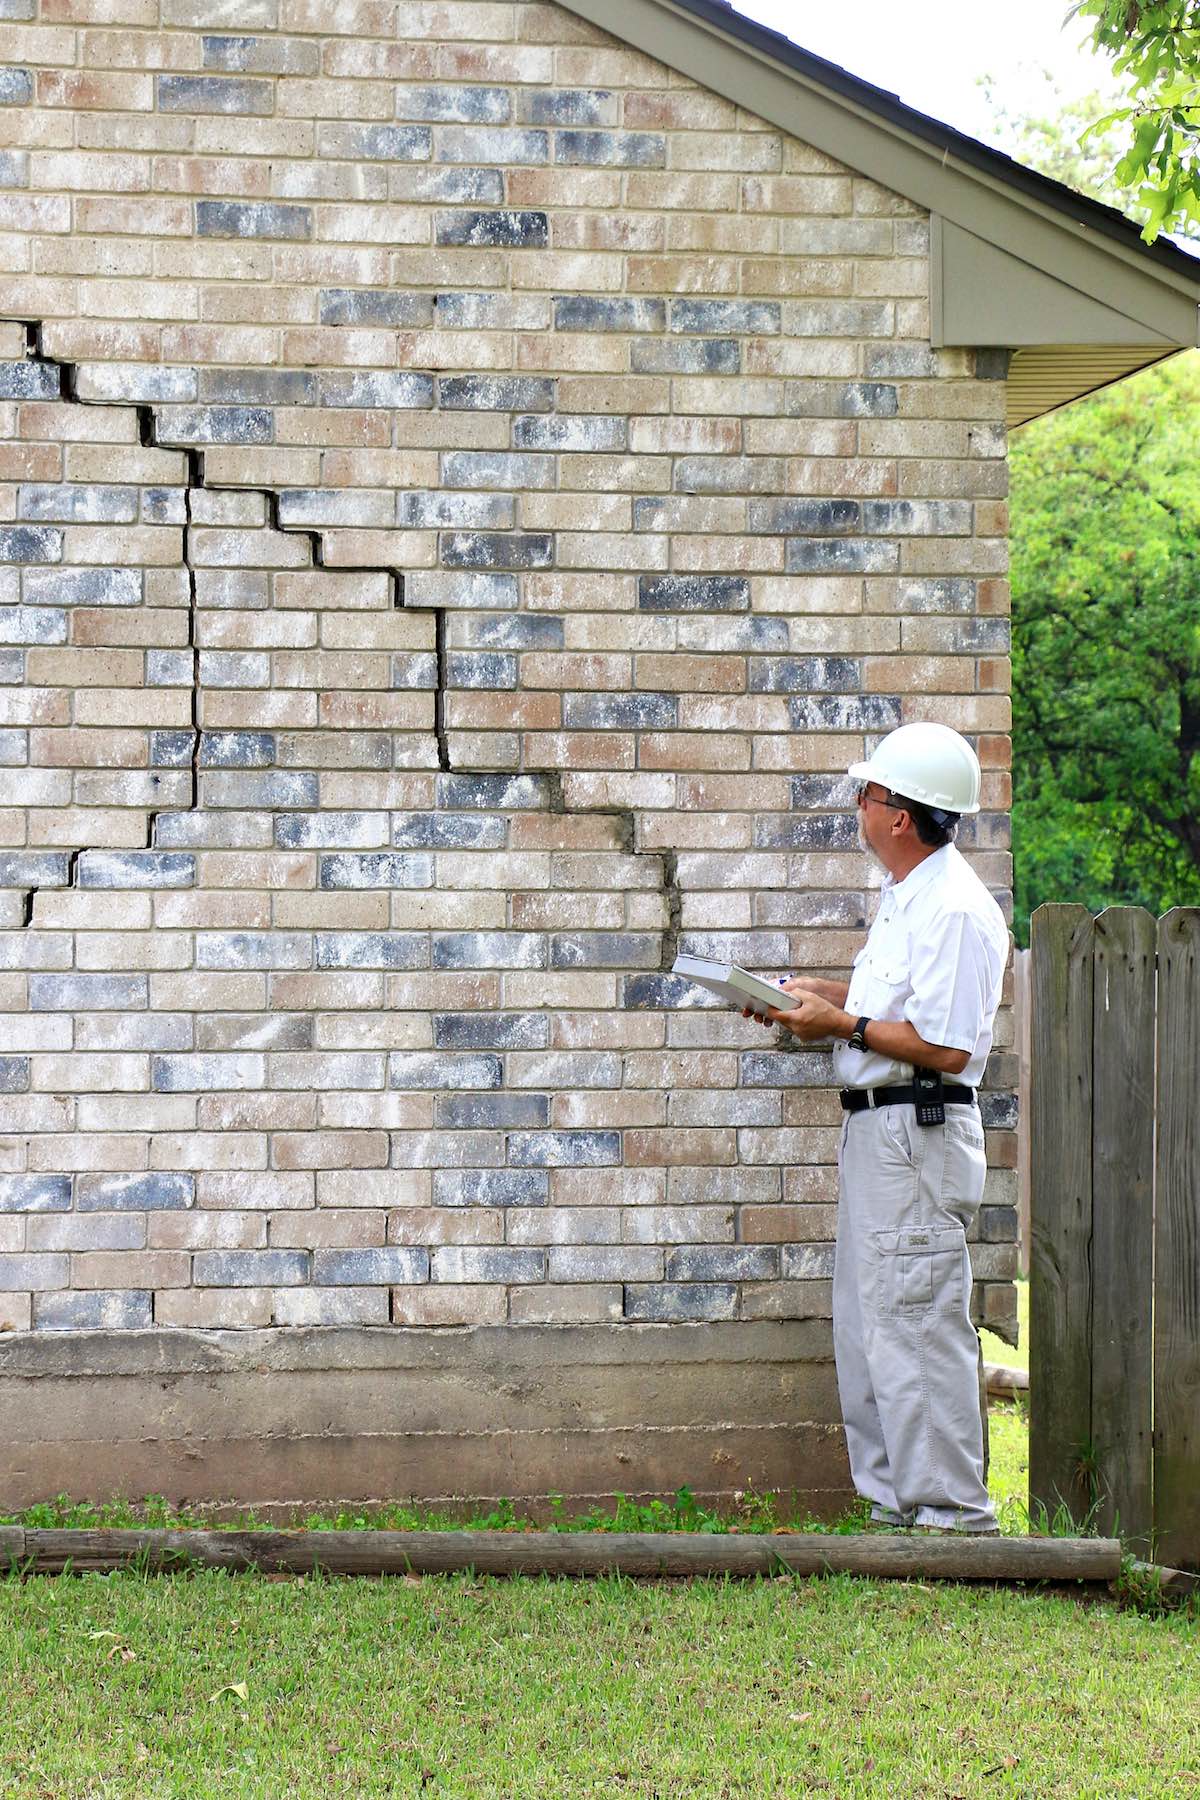 4 Signs That Your Property is Suffering from Subsidence